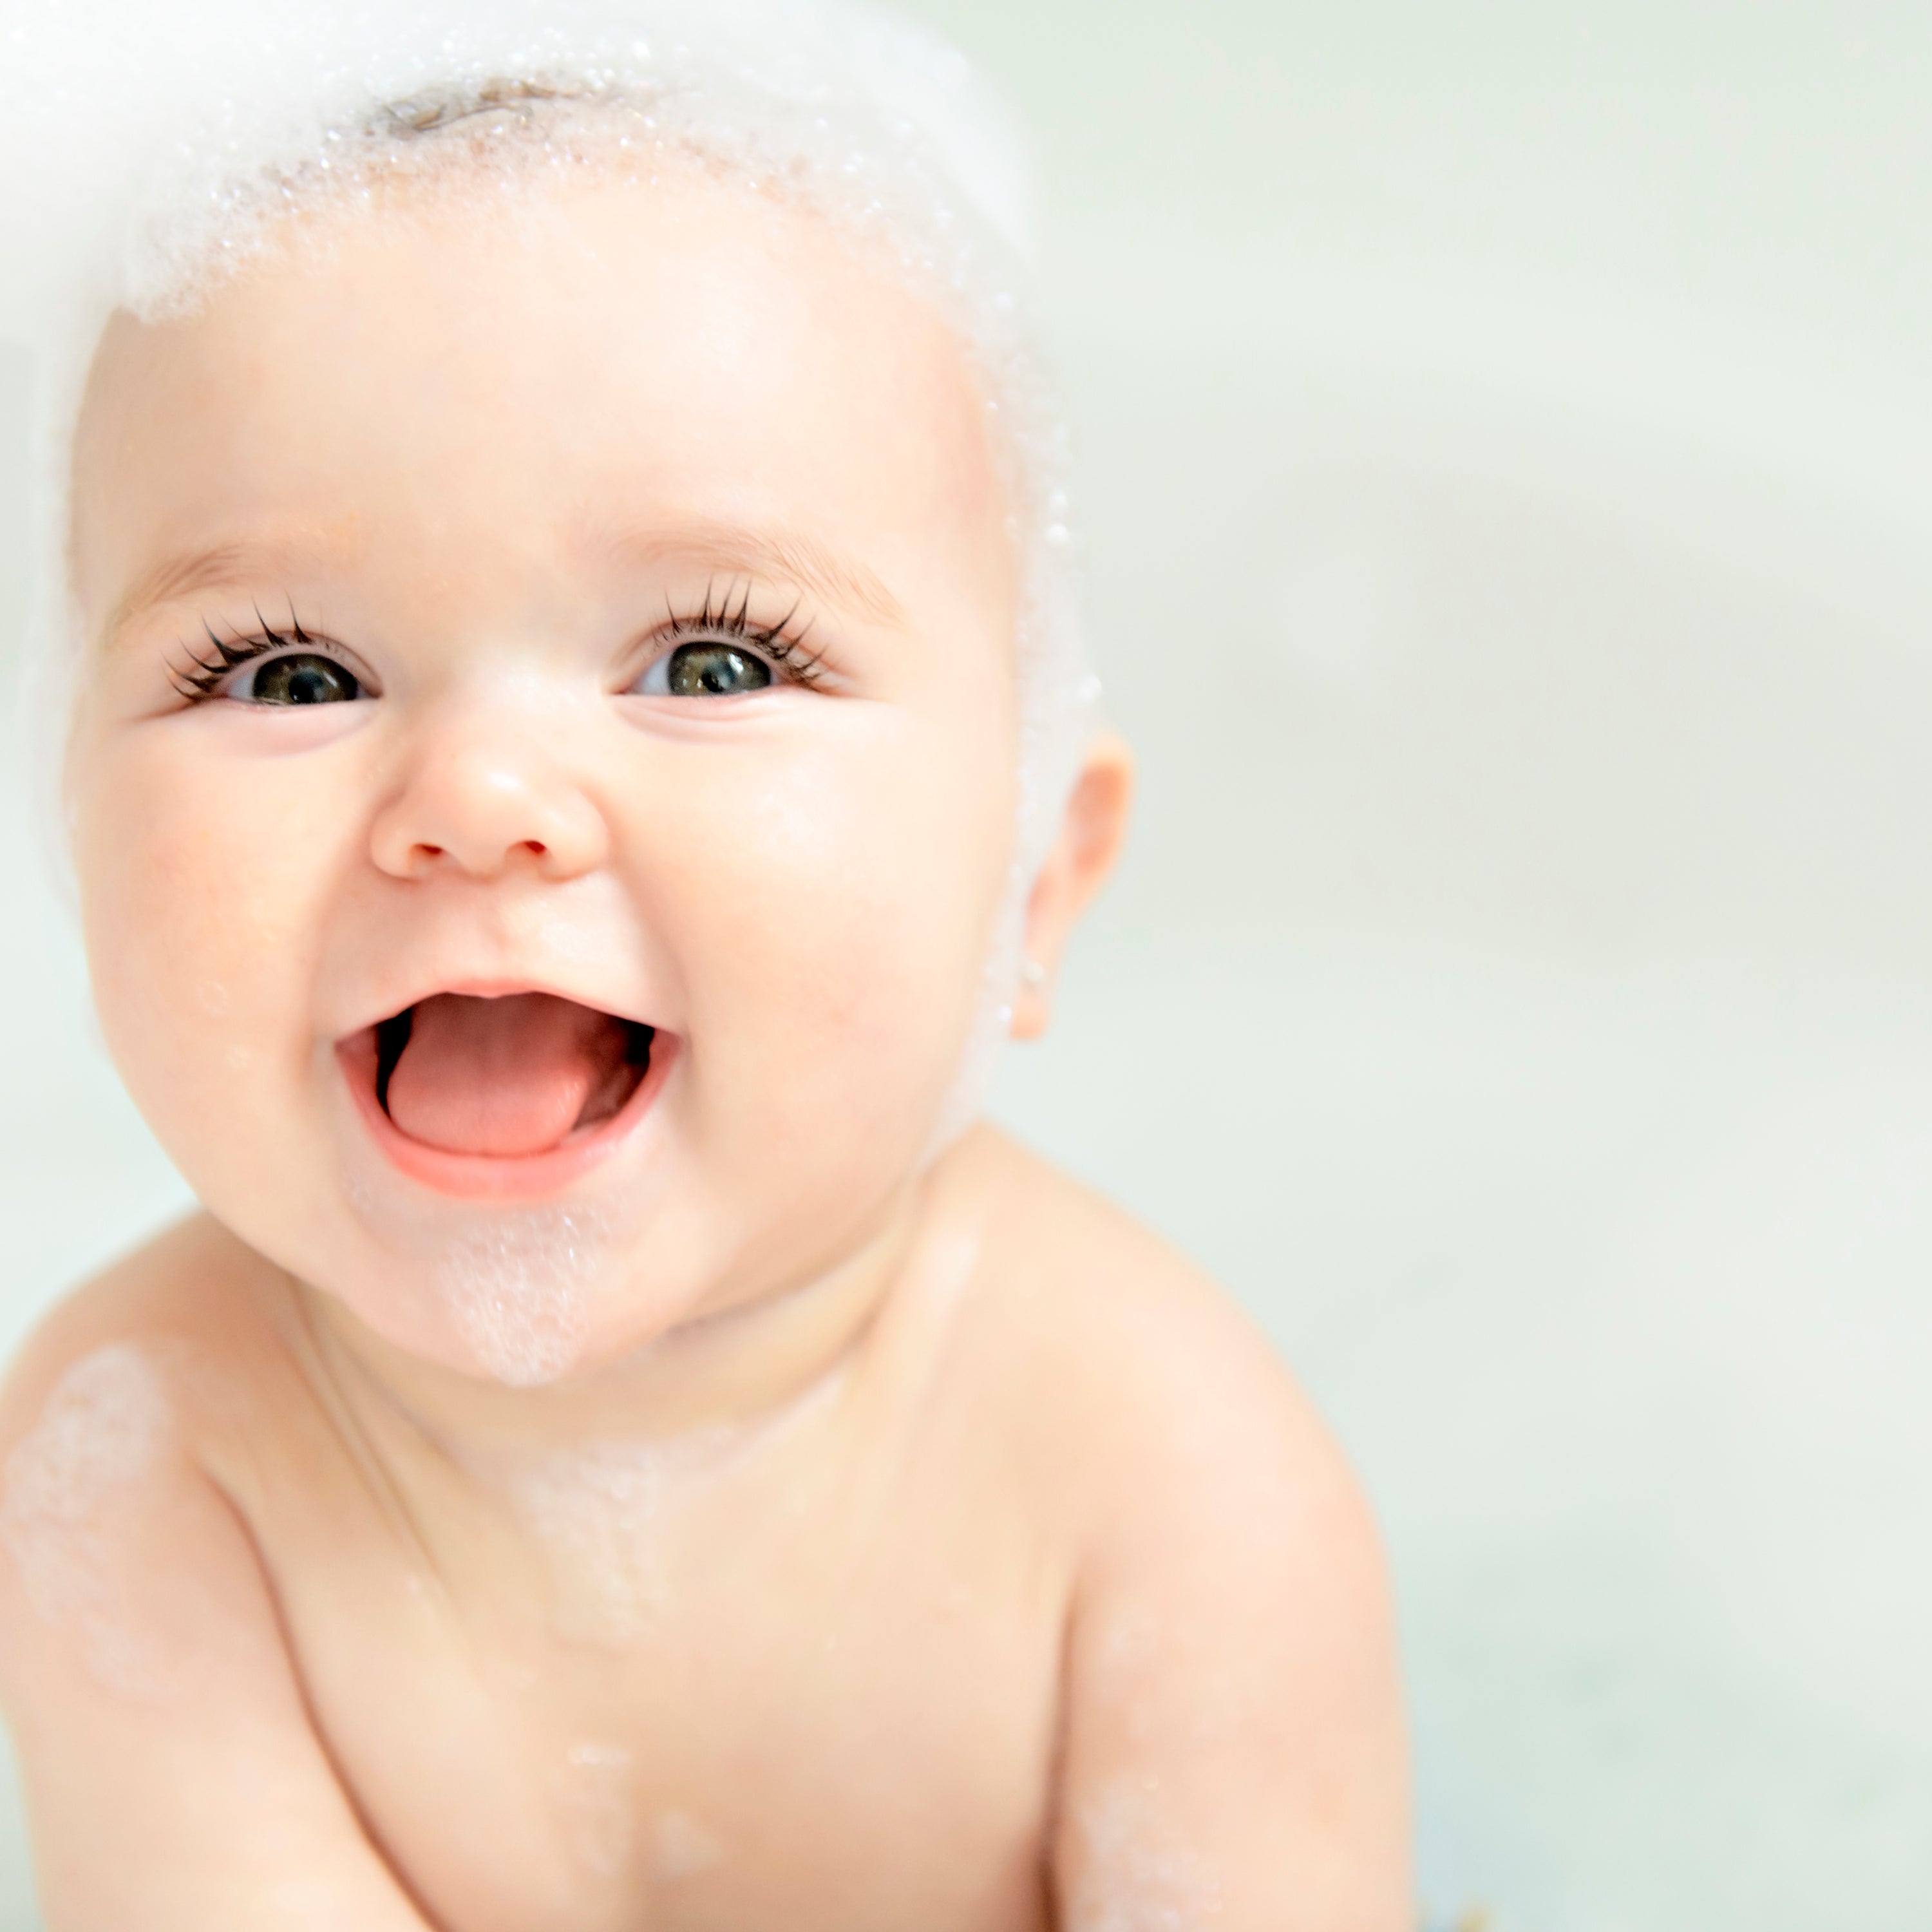 How To Make A Baby Bath Fun and Easy?